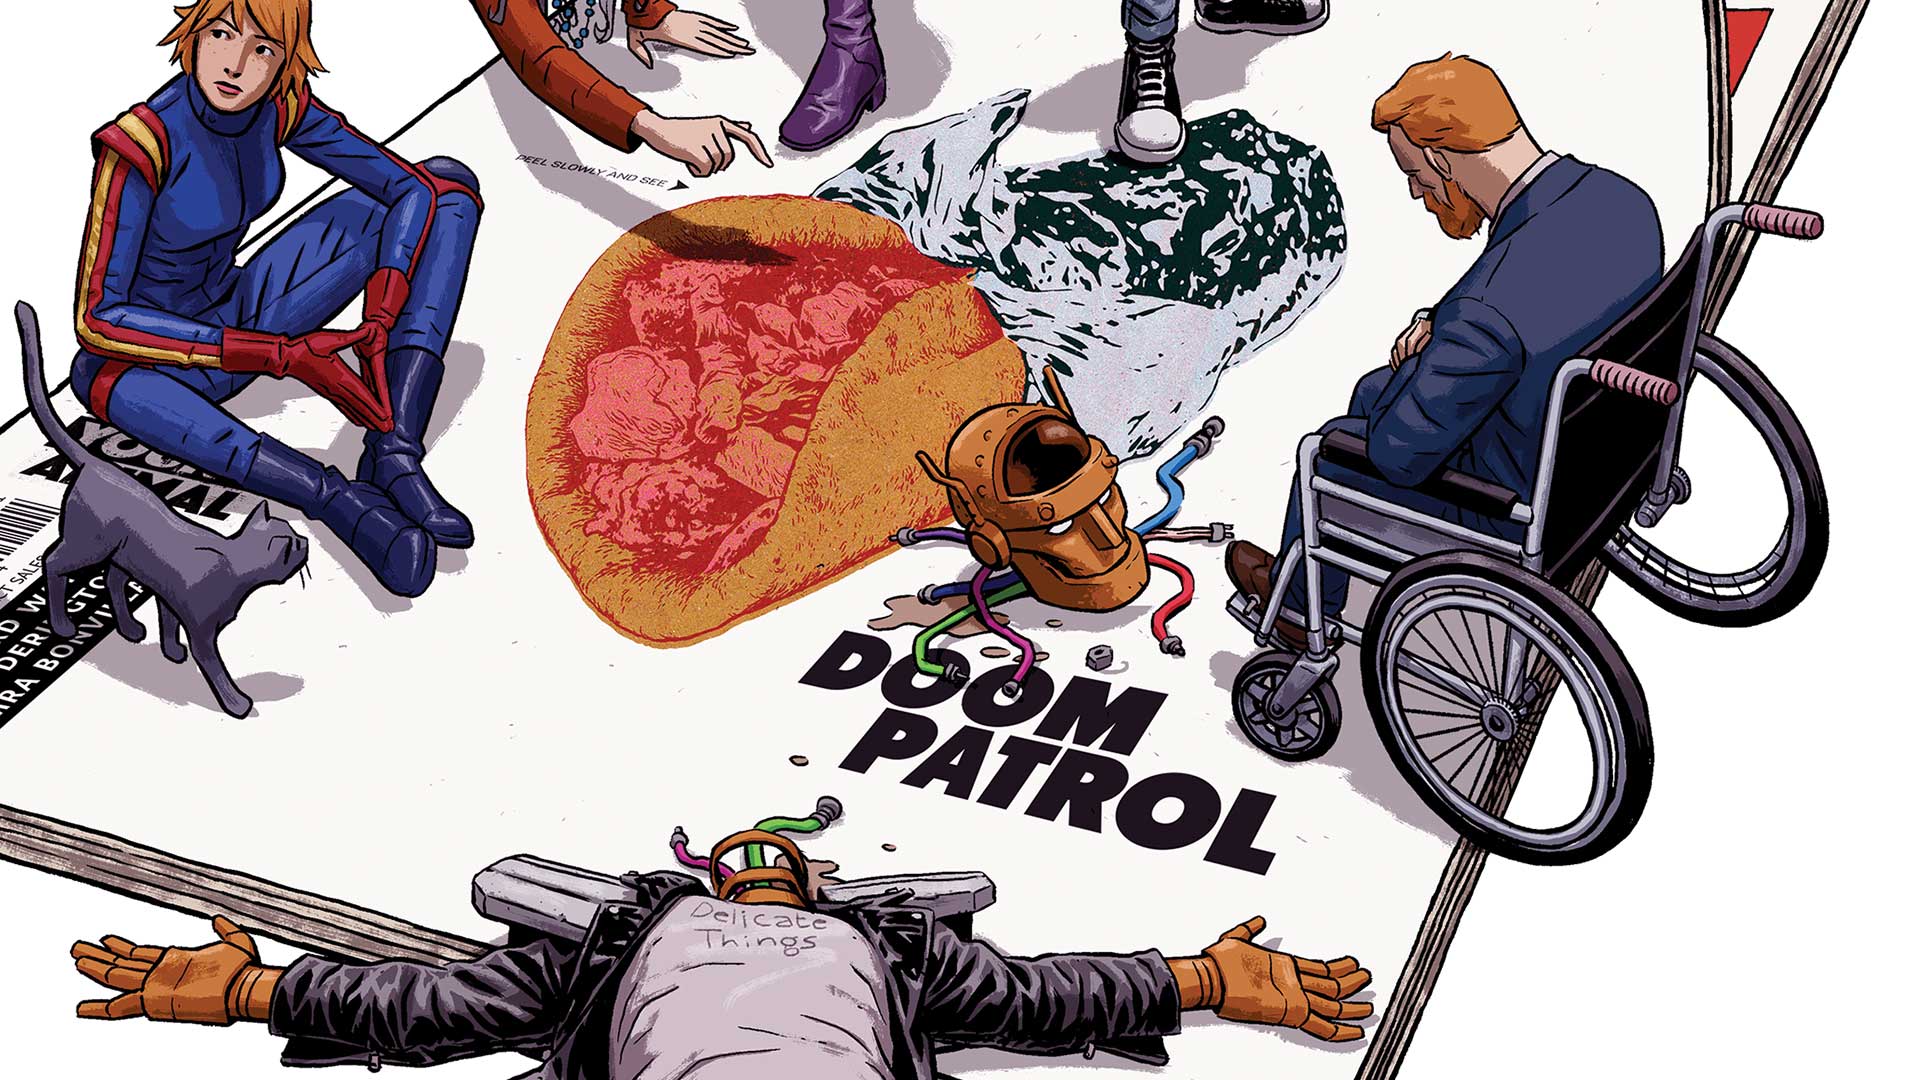 Various characters of the Doom Patrol are seen arranged around an issue of Doom Patrol in the cover for Doom Patrol Vol. 1: Brick by Brick.